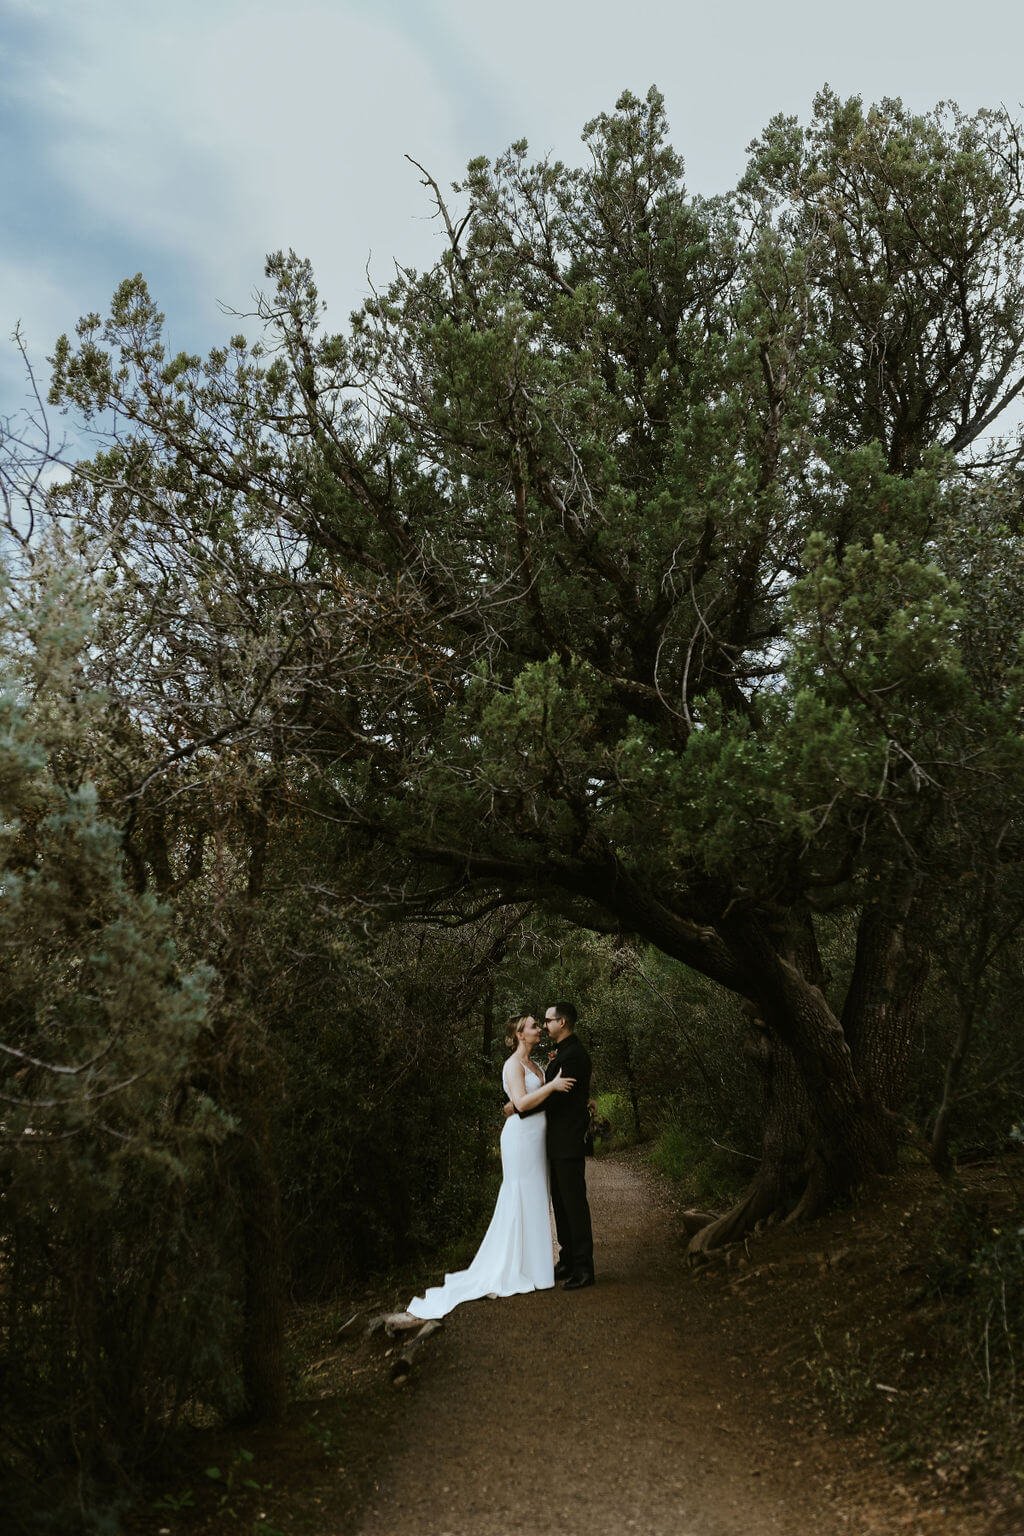 Bride and groom on a path under trees for a woodland wedding